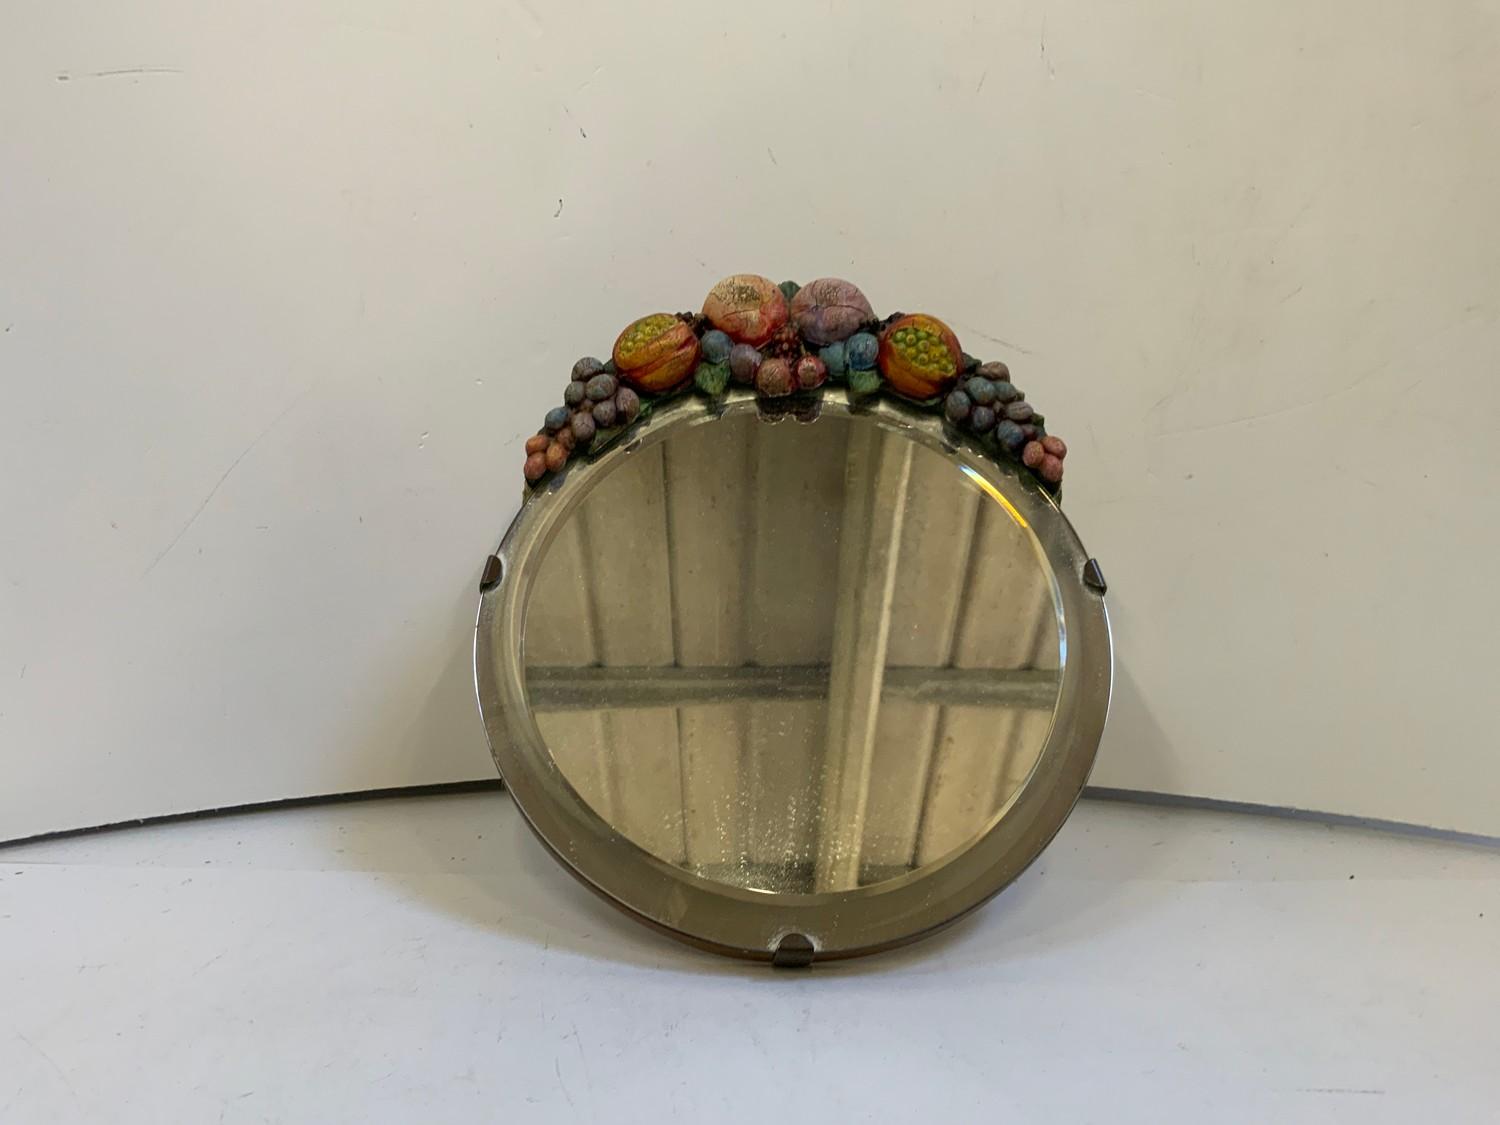 Mirror with Decorative Fruit Top - 24cm High